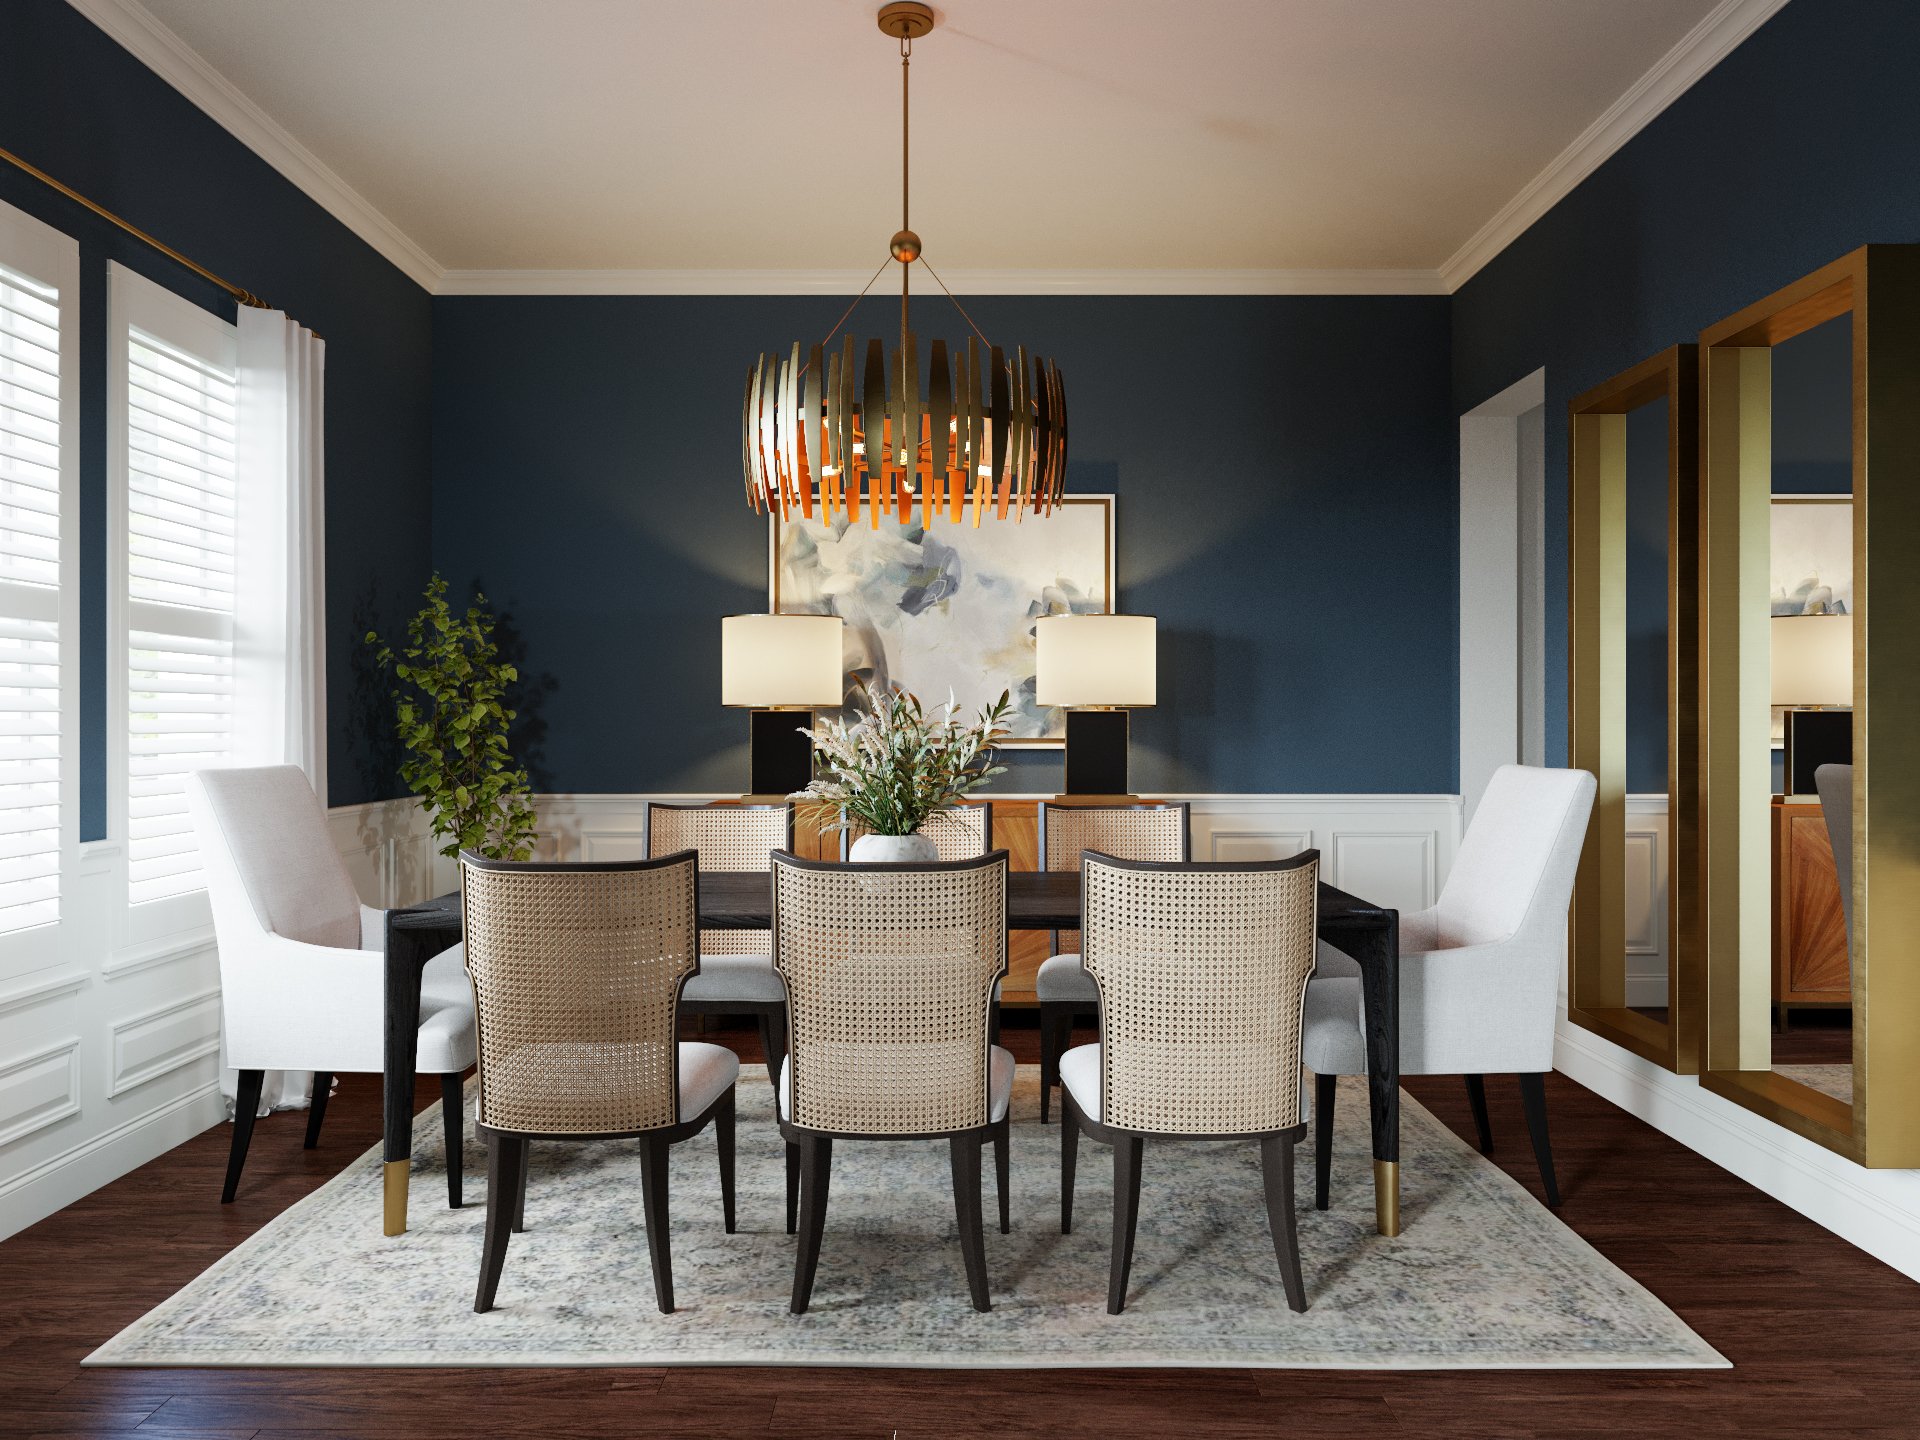 virtual interior design for a transitional dining room goes from moodboard to 3D room design